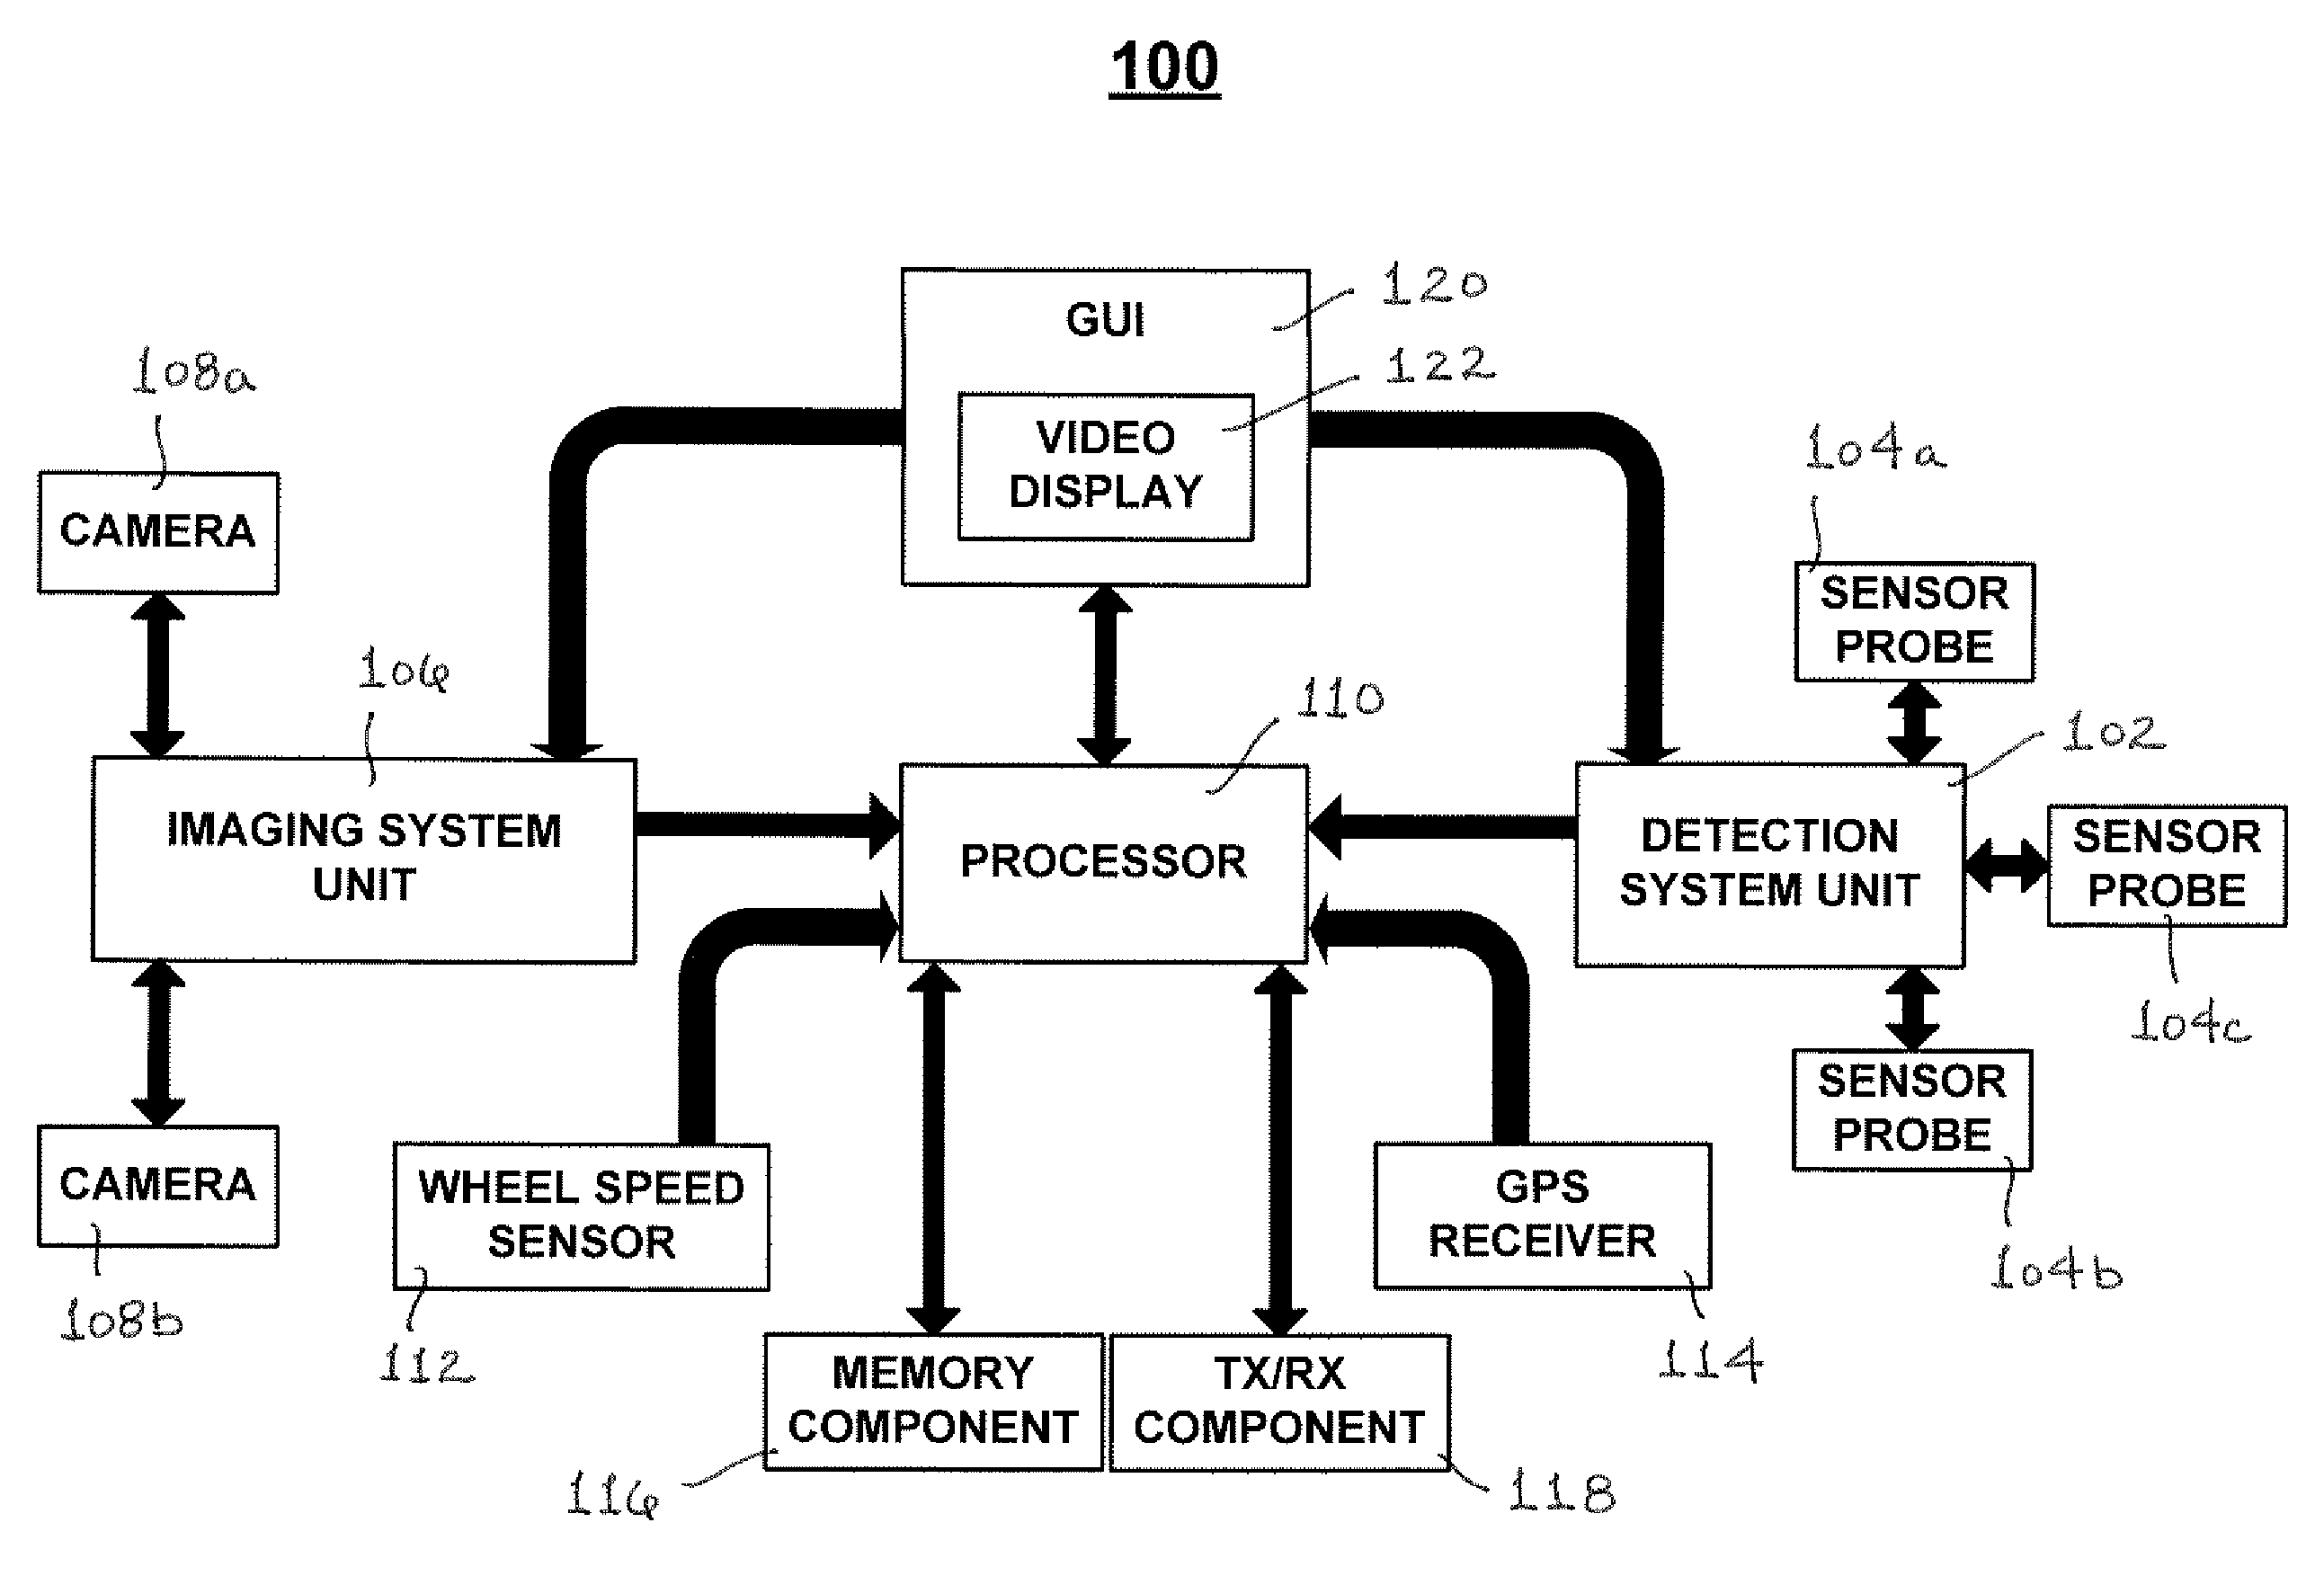 Apparatus and method for monitoring and controlling detection of stray voltage anomalies